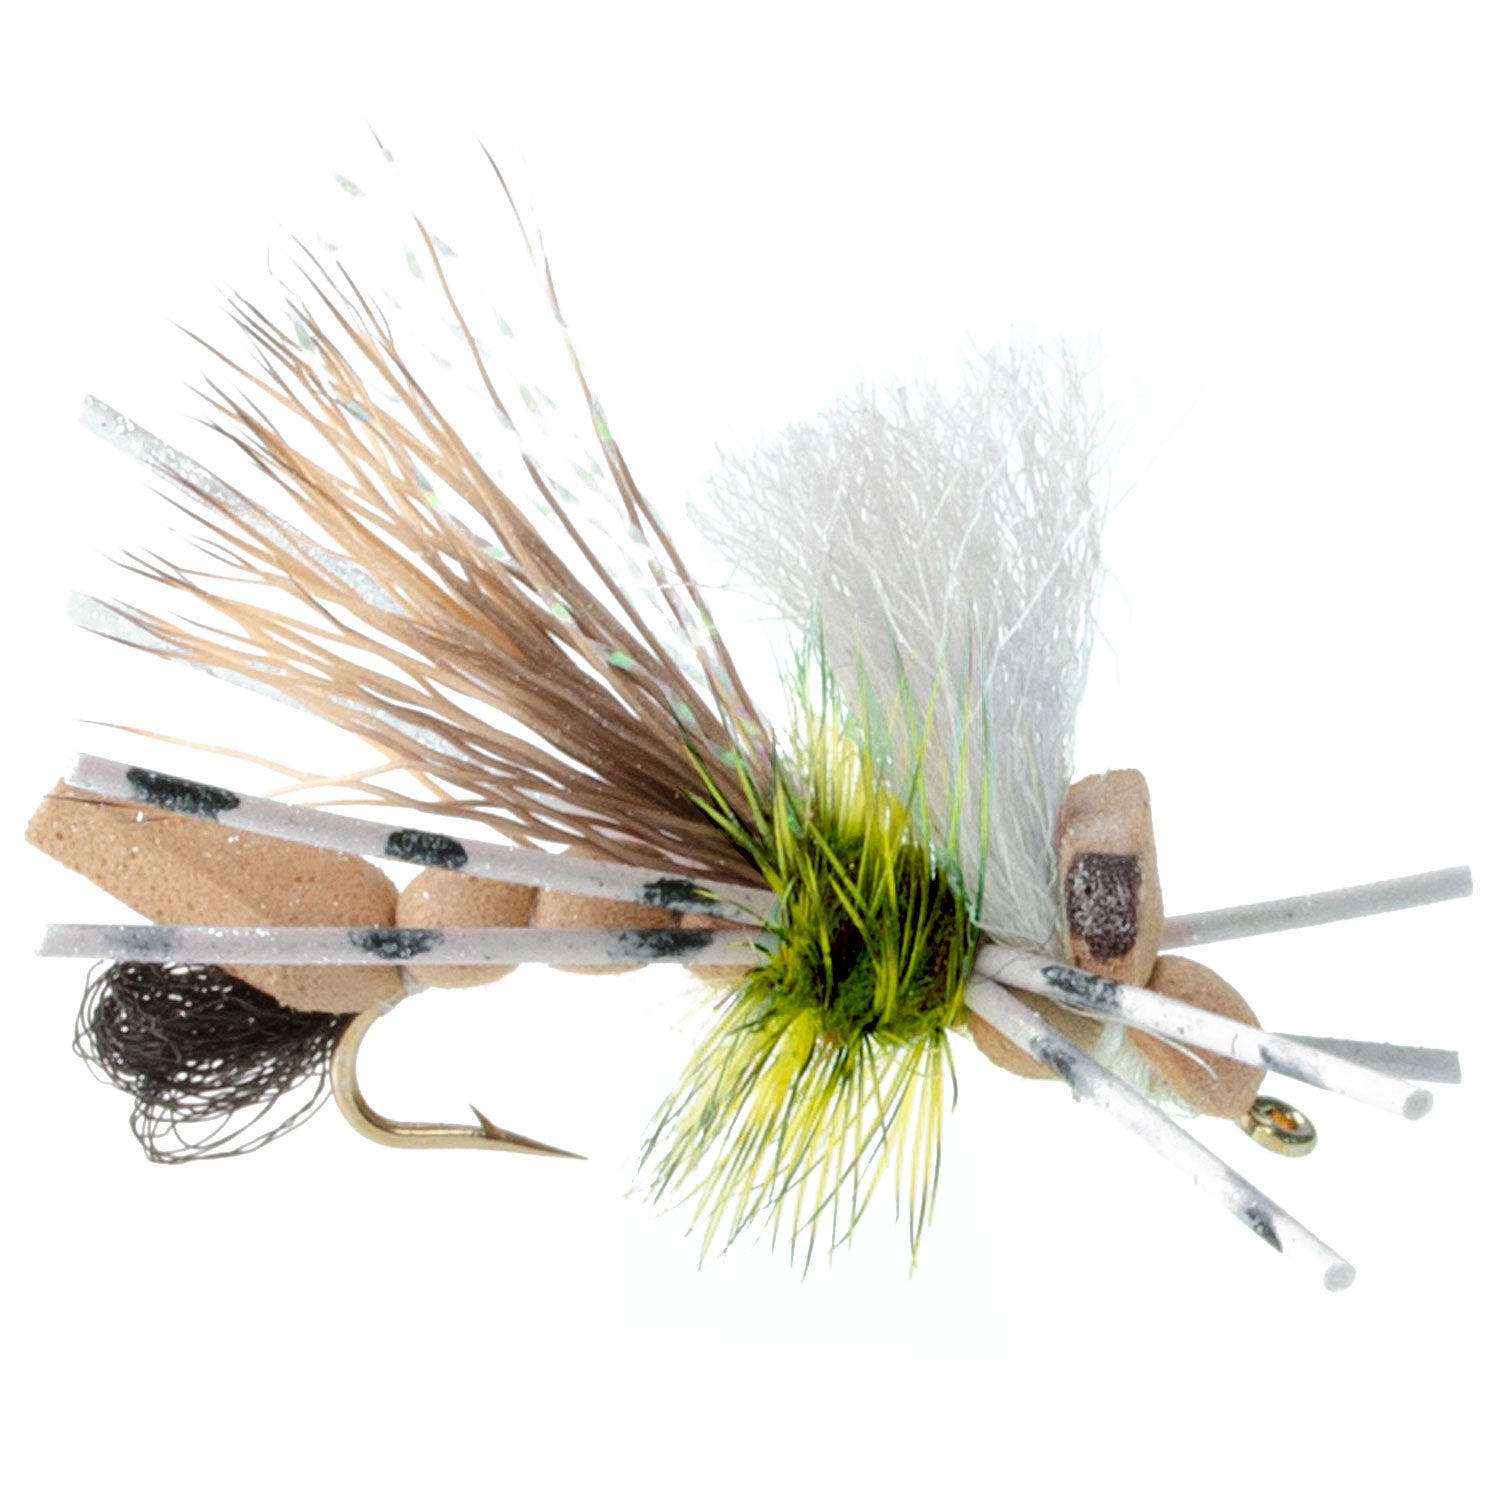 Trout Fly Assortment - Dropper Hopper Foam Body 12 Flies 4 Patterns Trout Fishing Fly Collection